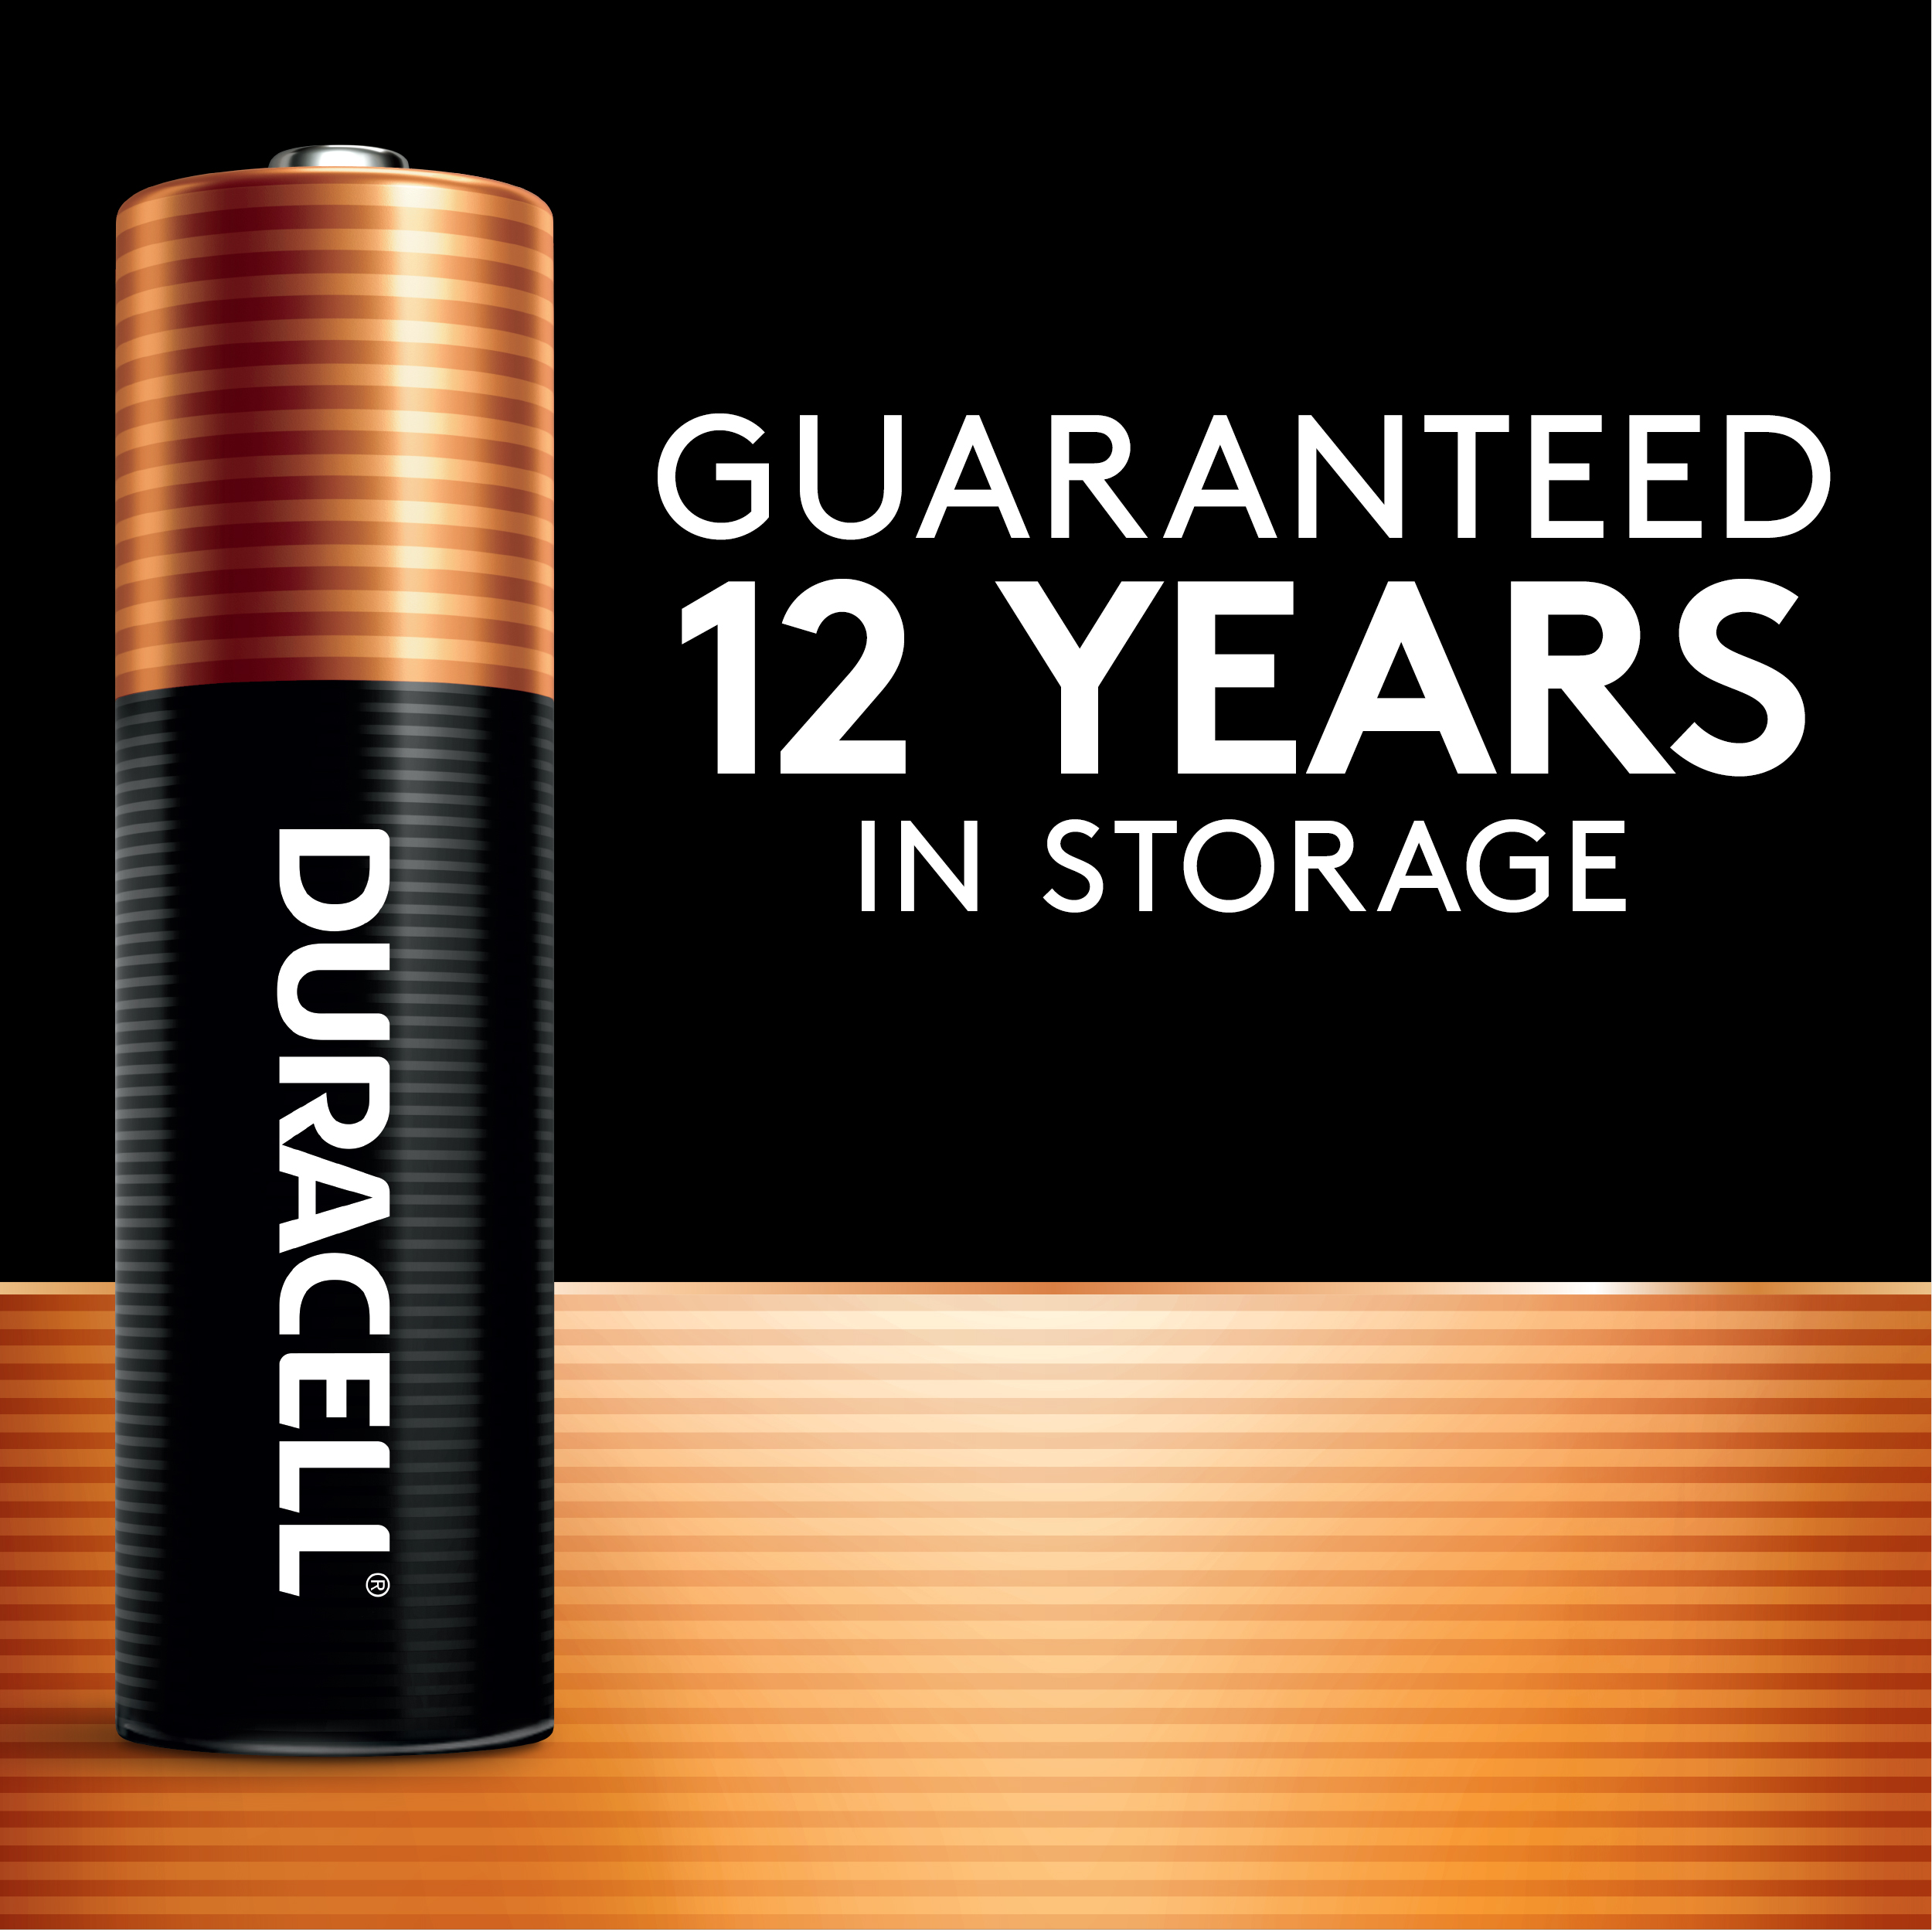 Duracell Coppertop AA Battery, Long Lasting Double A Batteries, 16 Pack - image 5 of 9